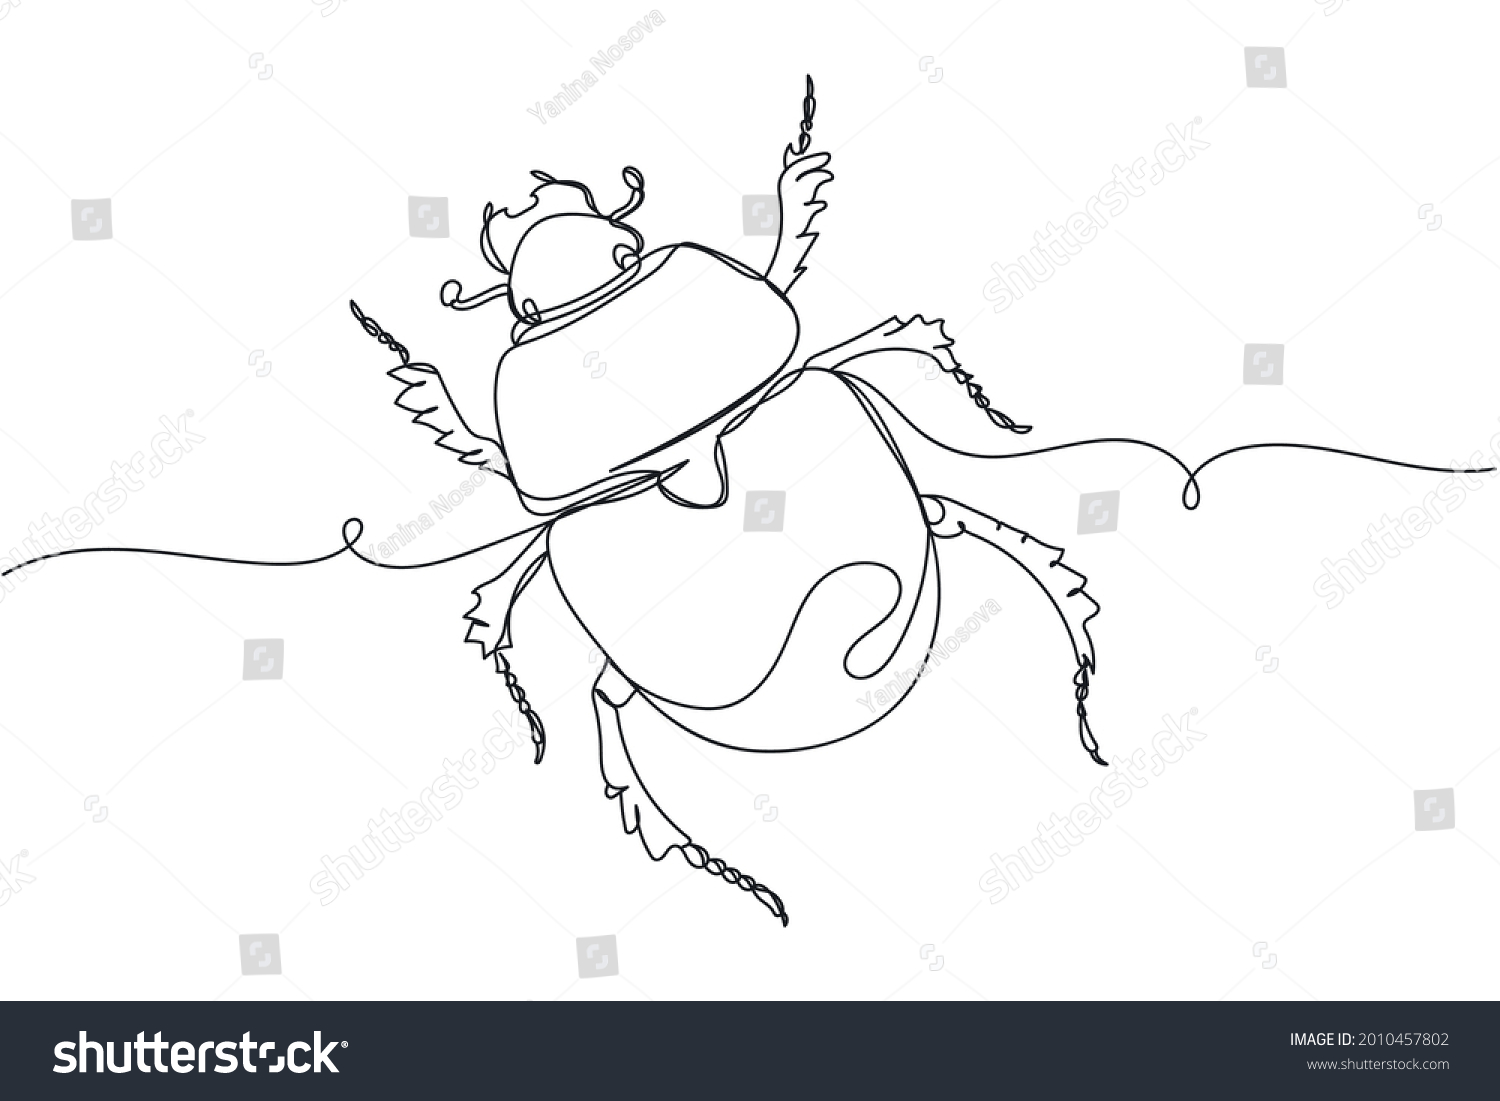 SVG of Continuous one line of anoplotrupes stercorosus dor beetle in silhouette on a white background. Linear stylized.Minimalist. svg